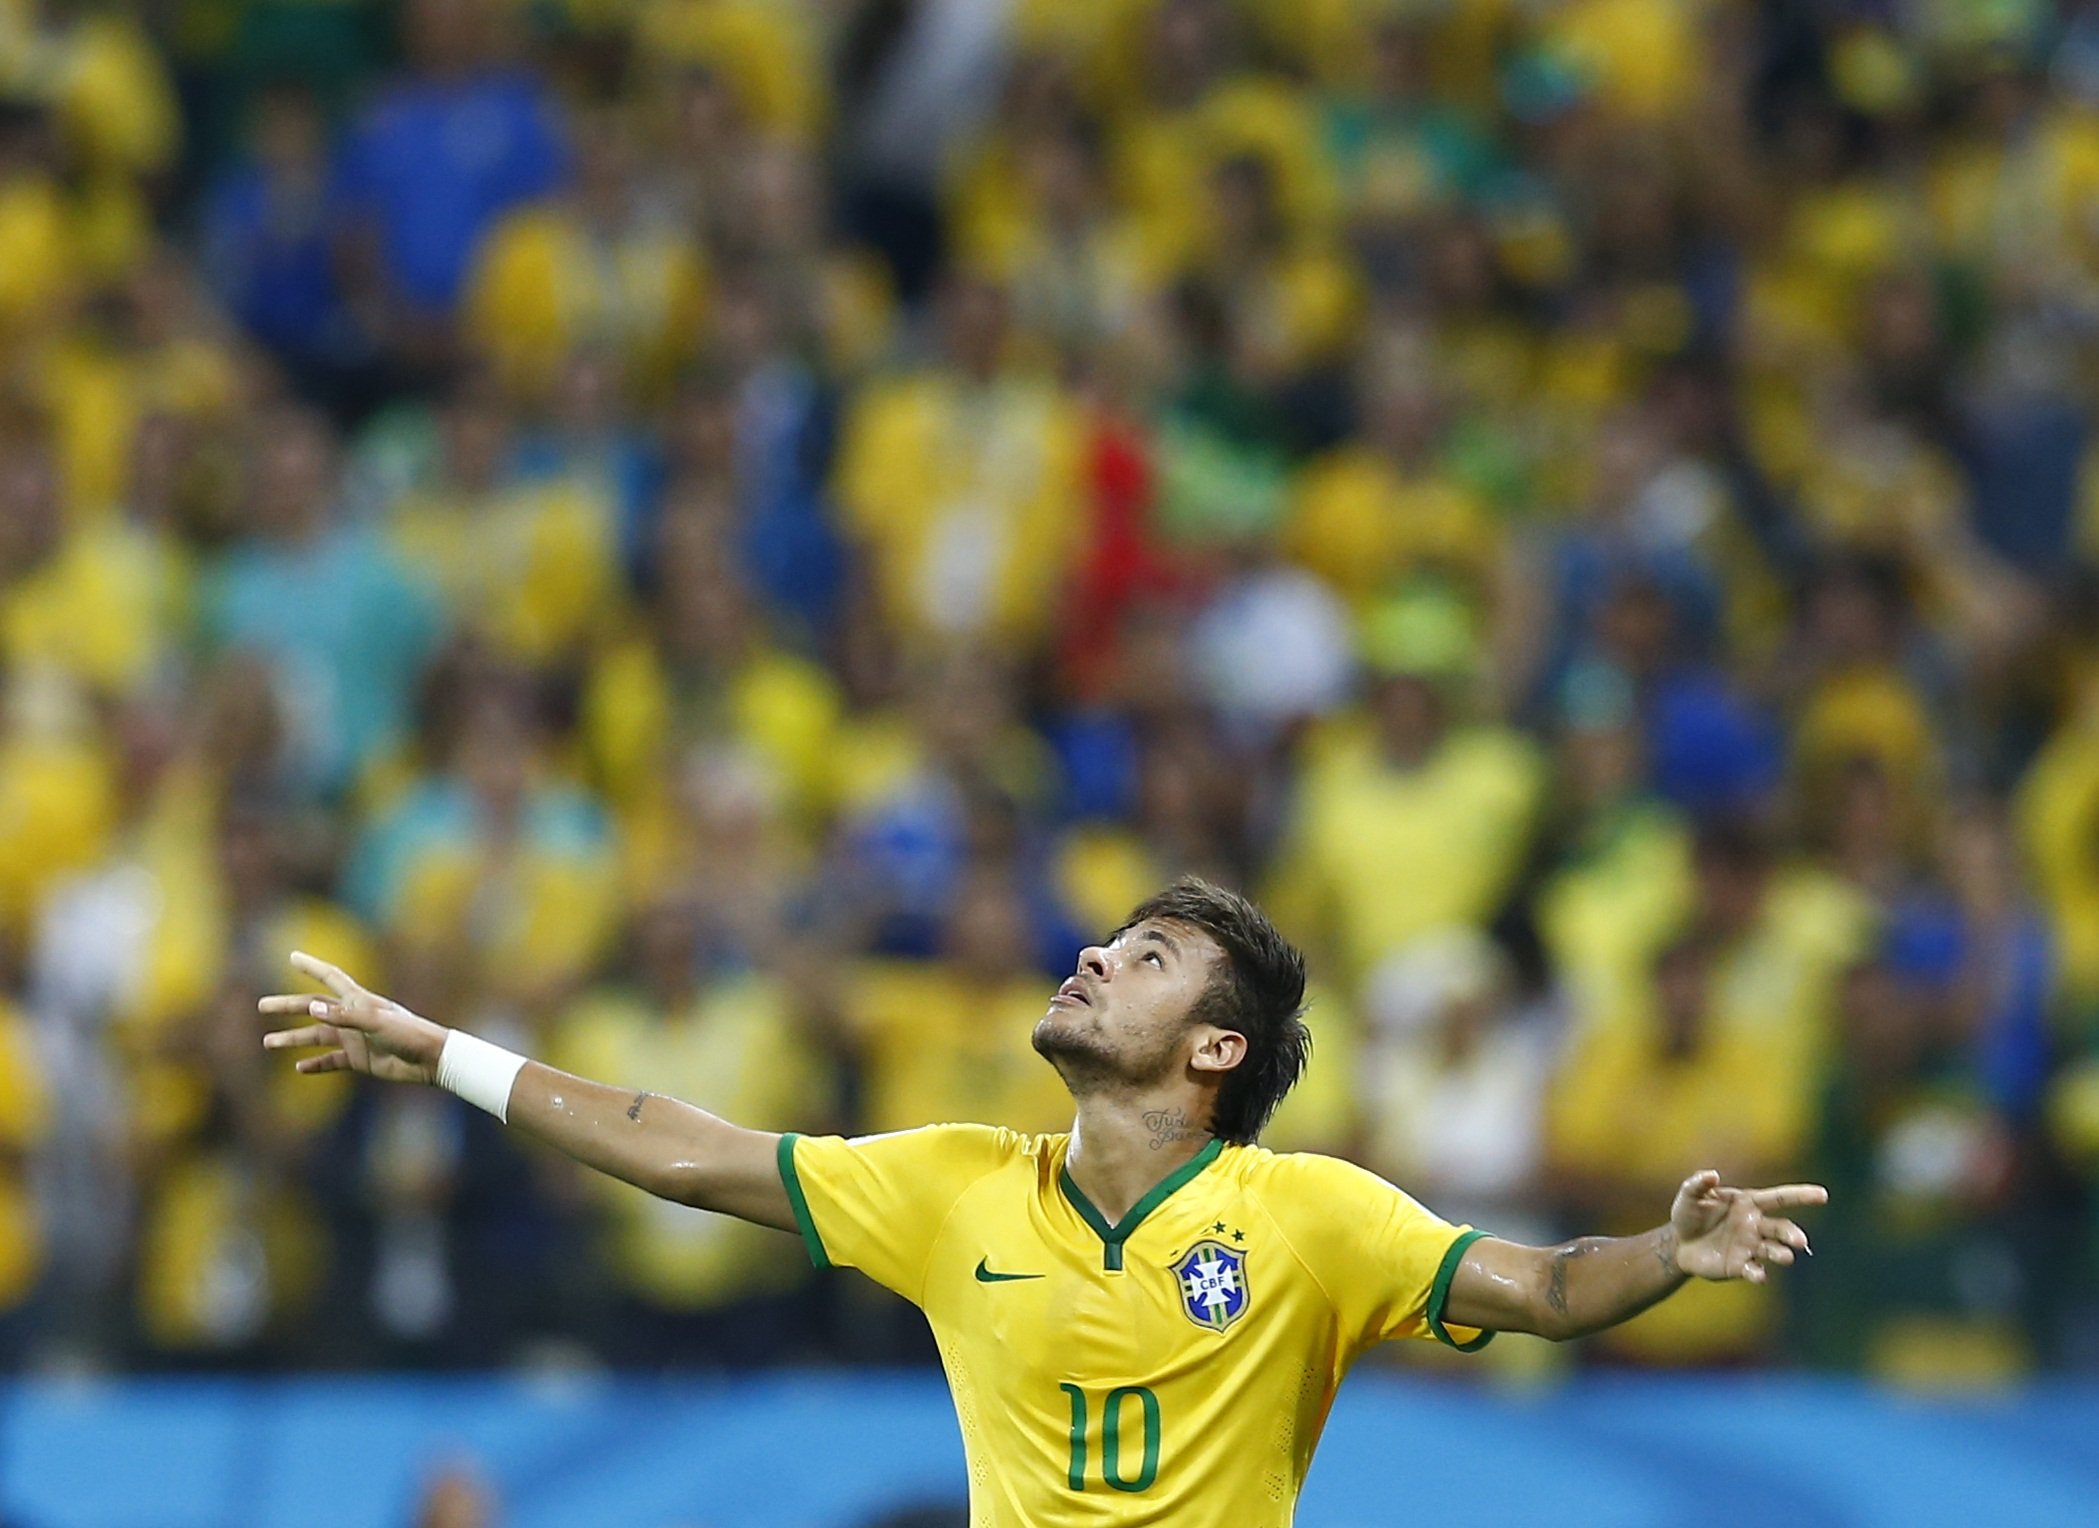 Brazil's Neymar celebrates a goal during the 2014 World Cup opening match between Brazil and Croatia at the Corinthians arena in Sao Paulo June 12, 2014.